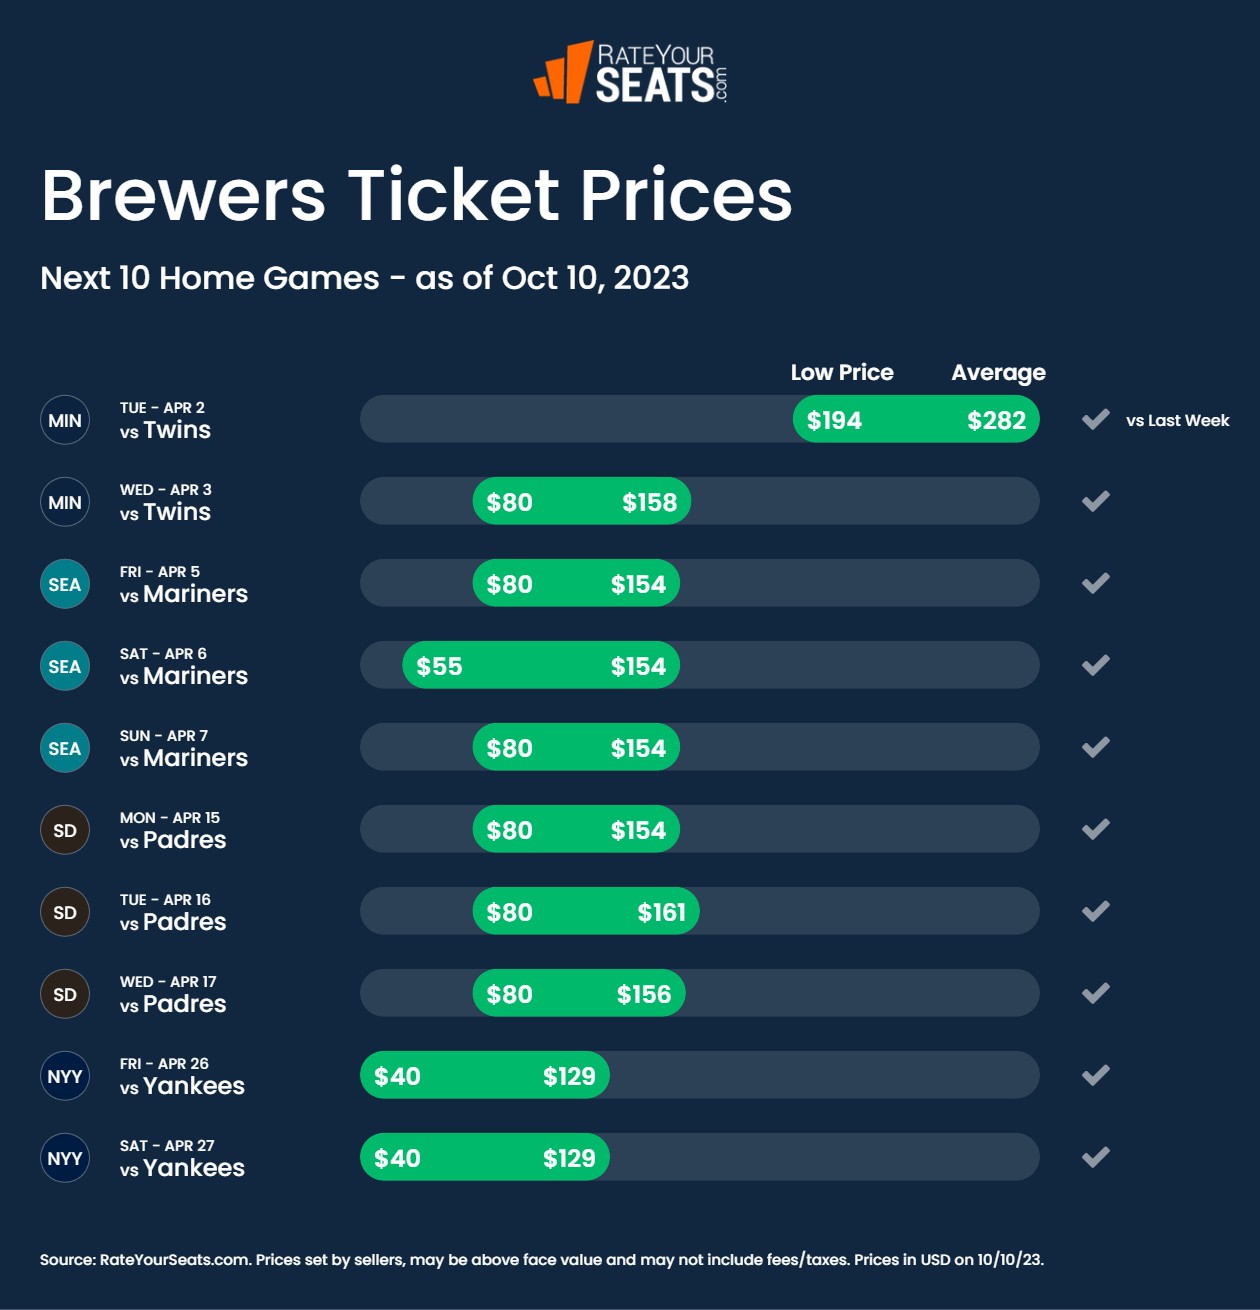 Brewers tickets pricing week of October 10 2023